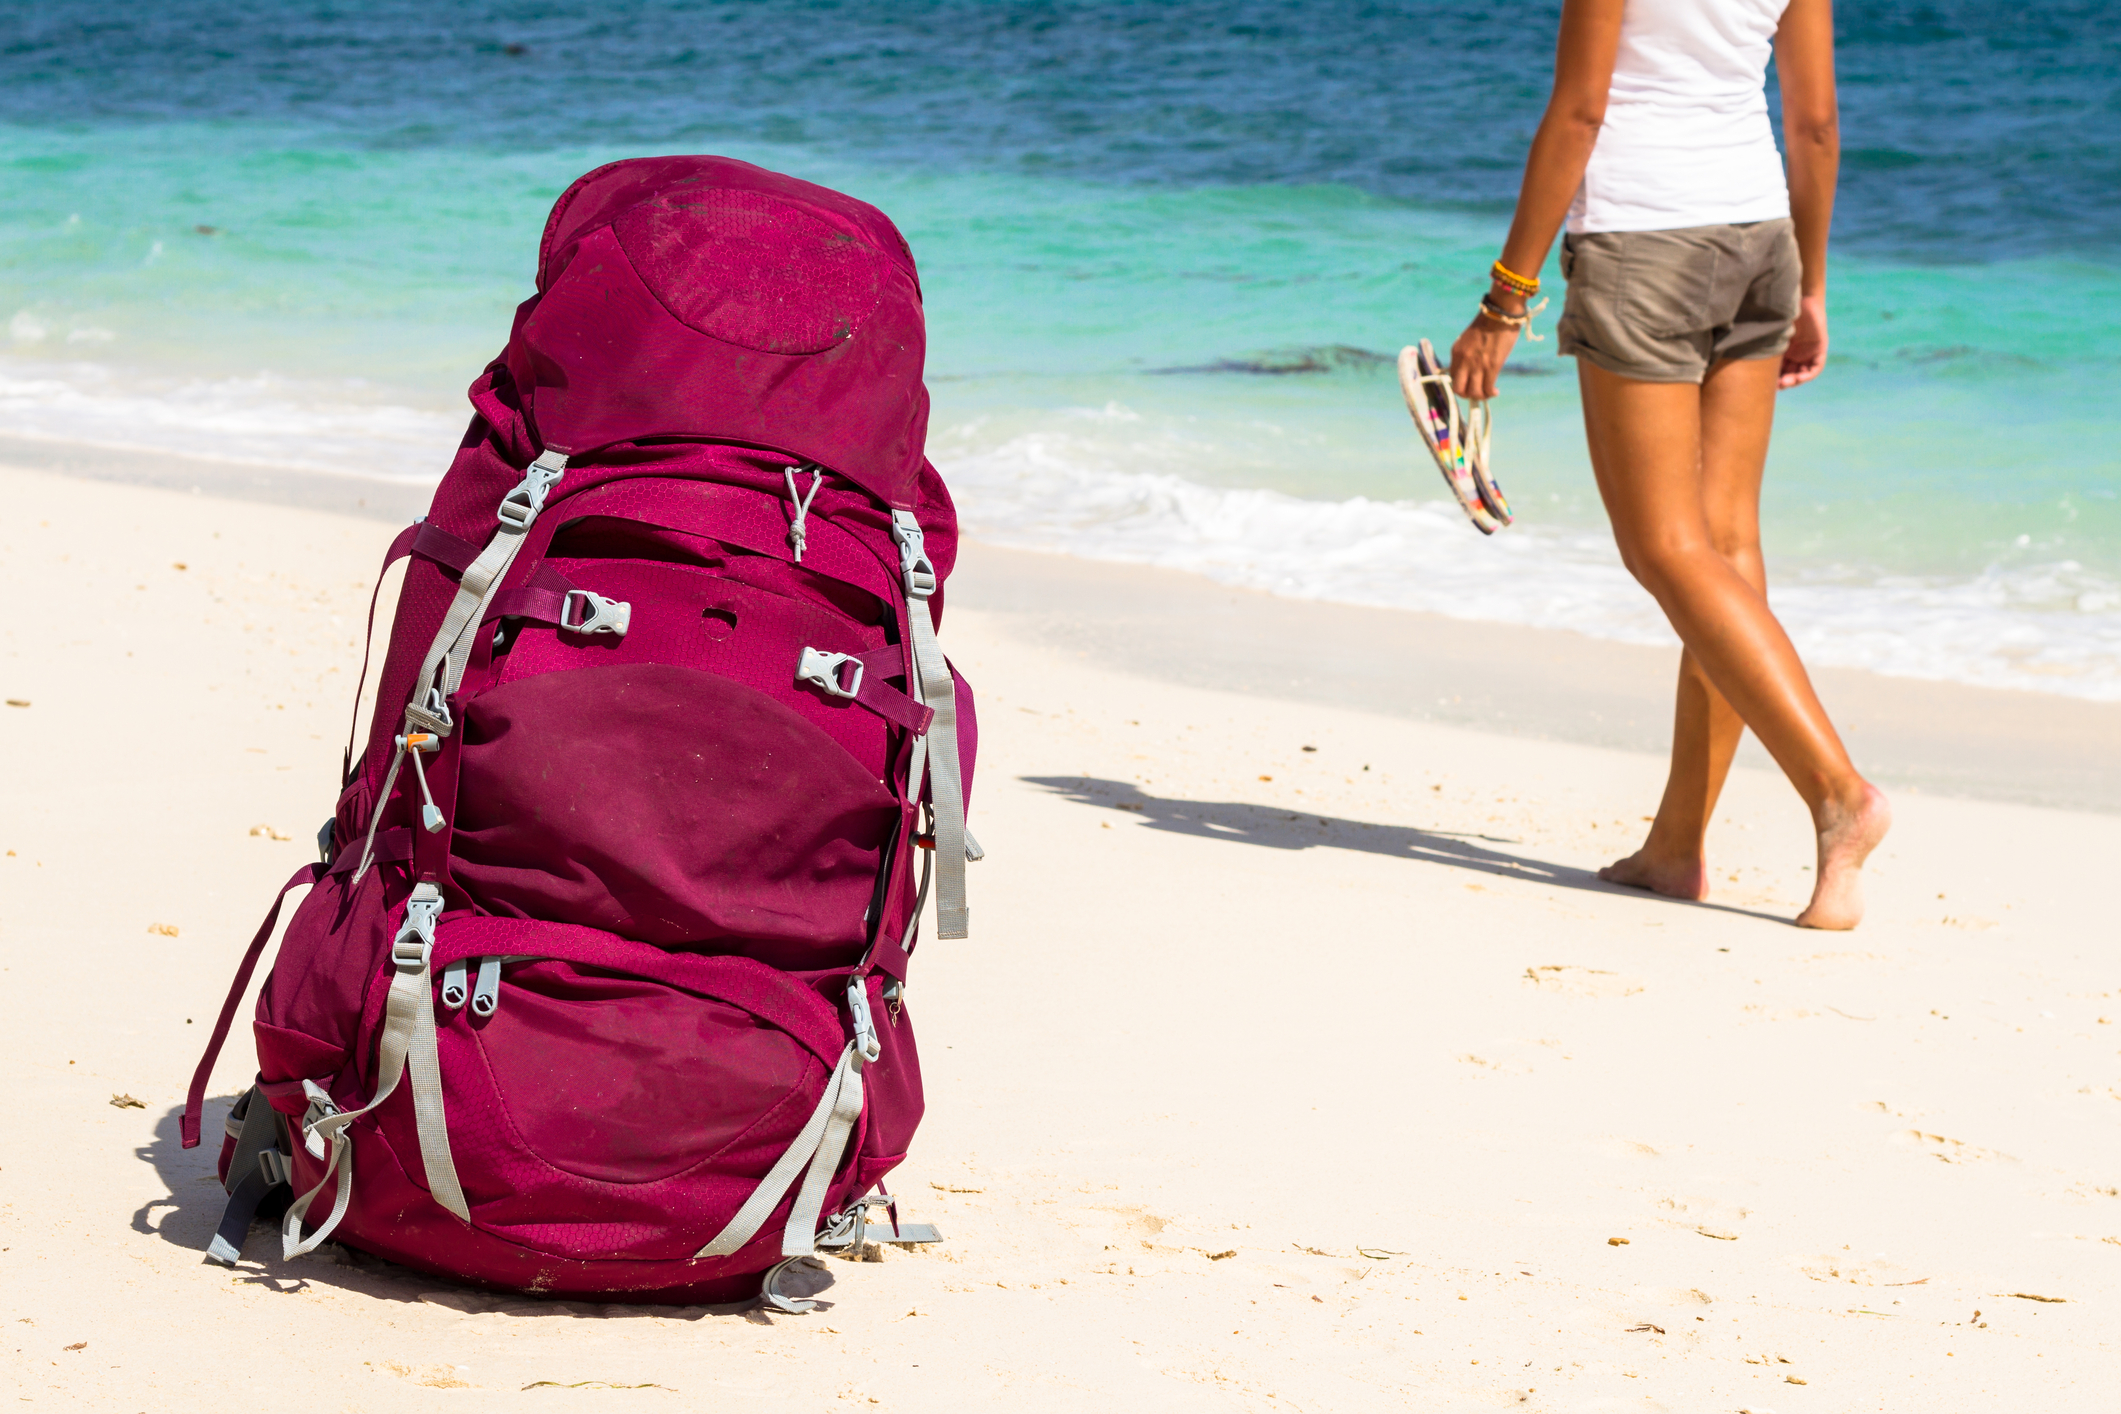 Every backpacker needs a back up plan